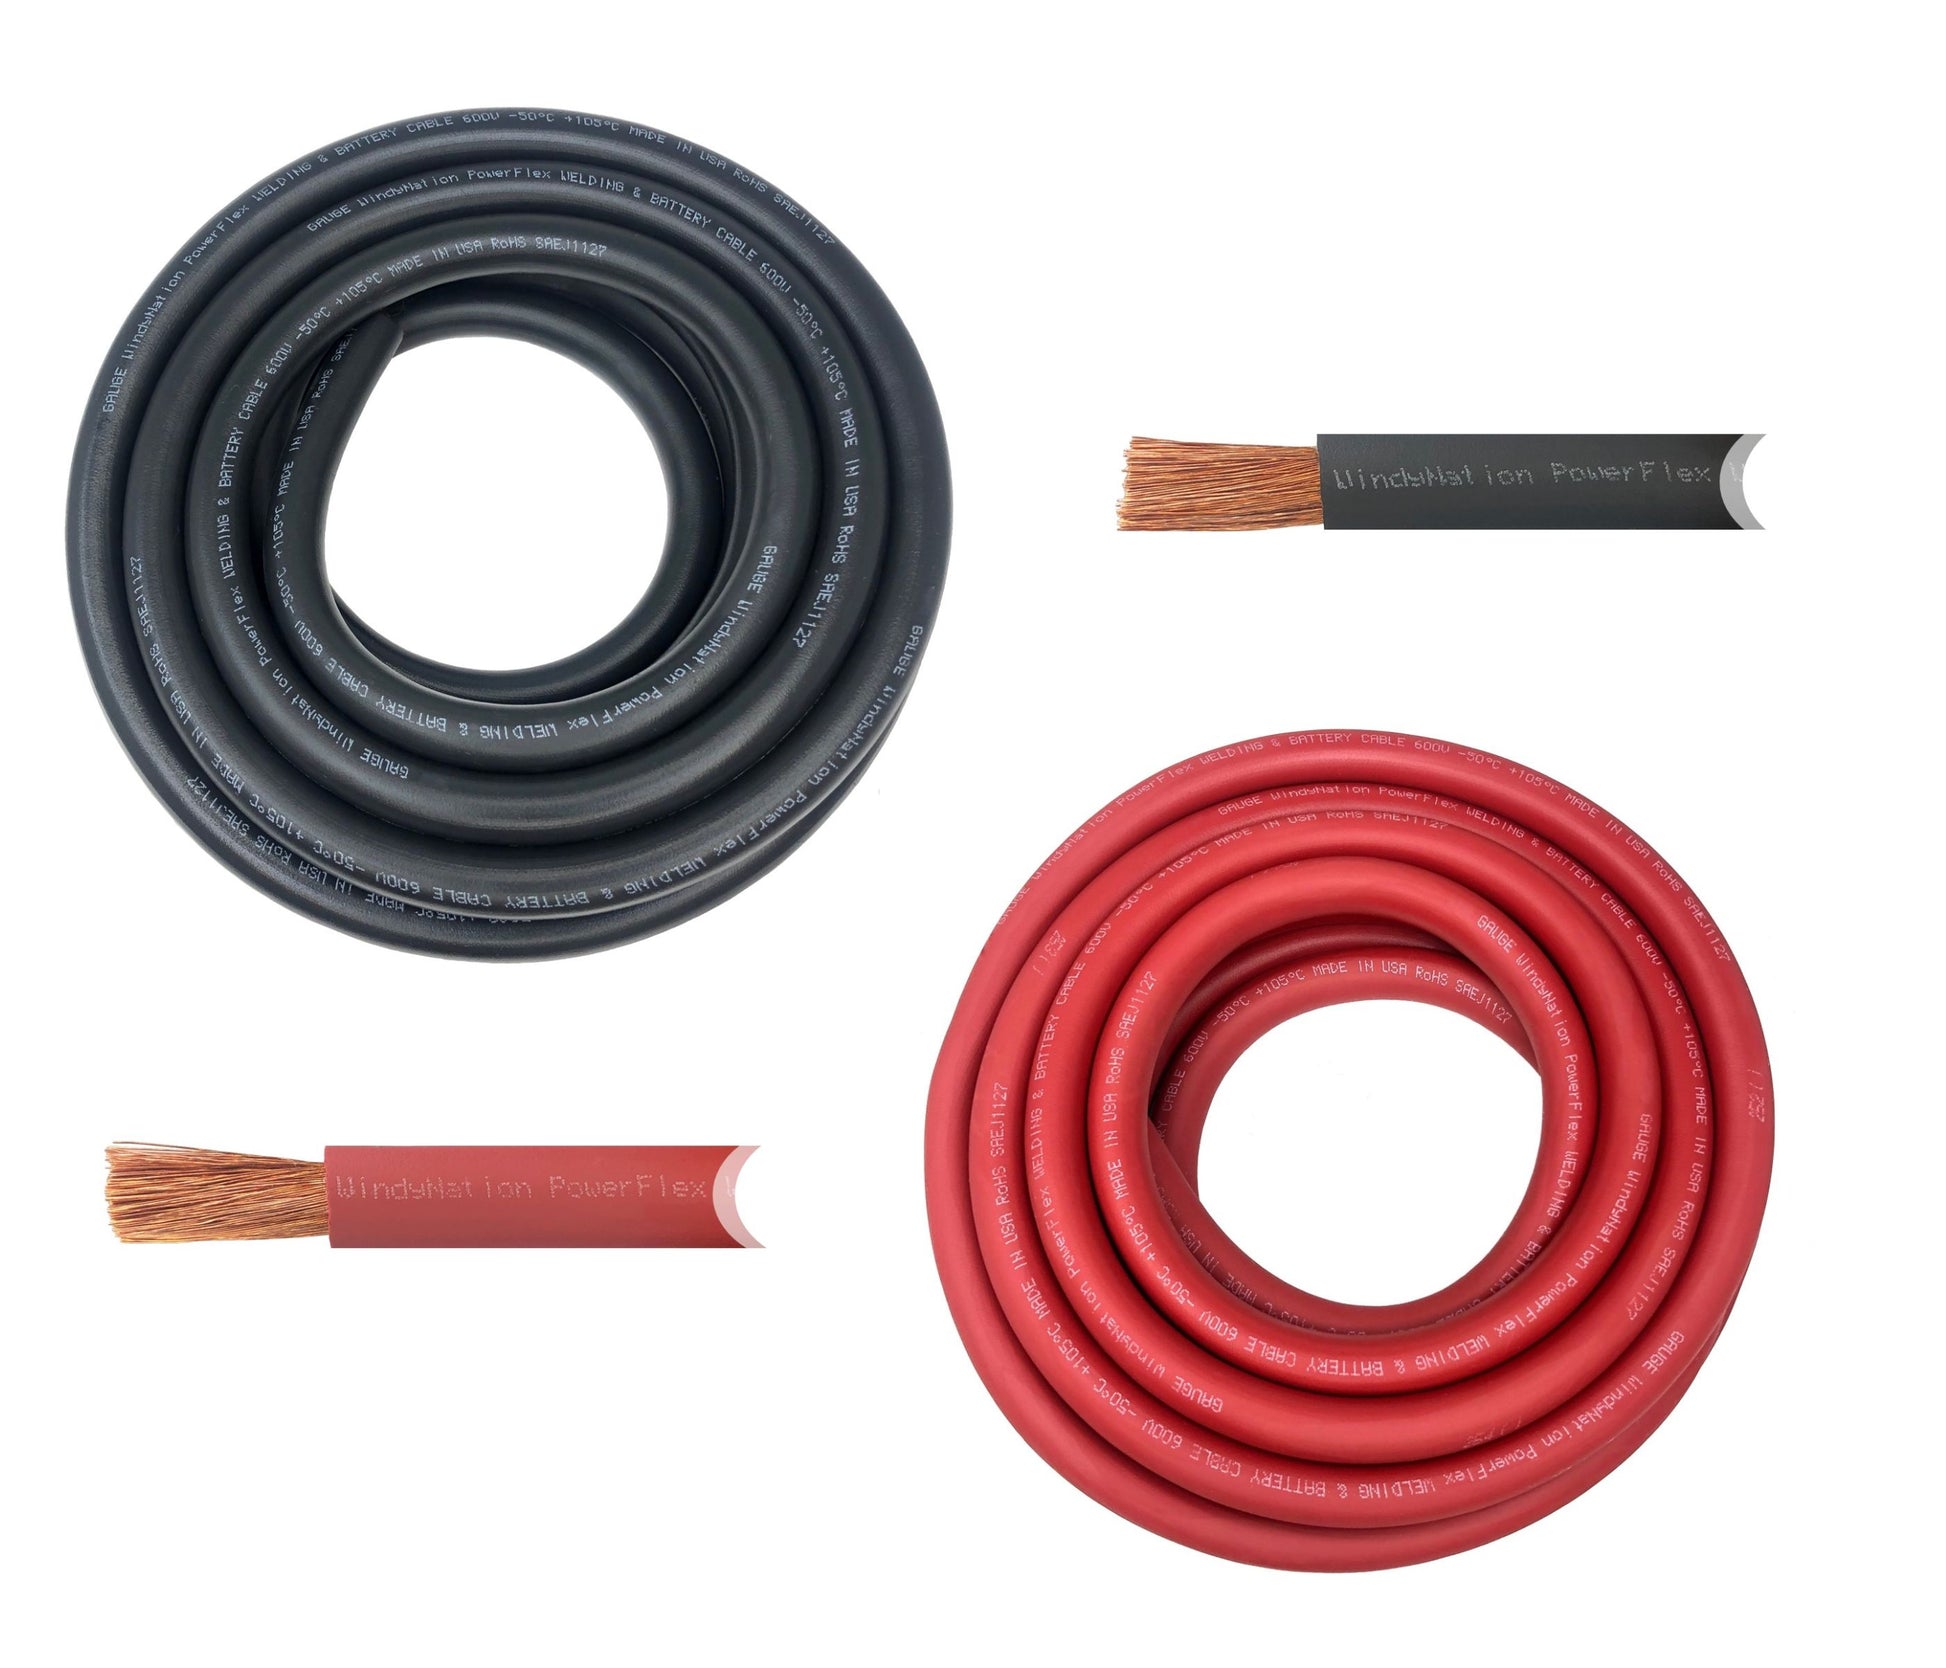 30 AWG Gauge Wire 25 ft. RED And 25 ft. Black total 50 ft USA SOLD